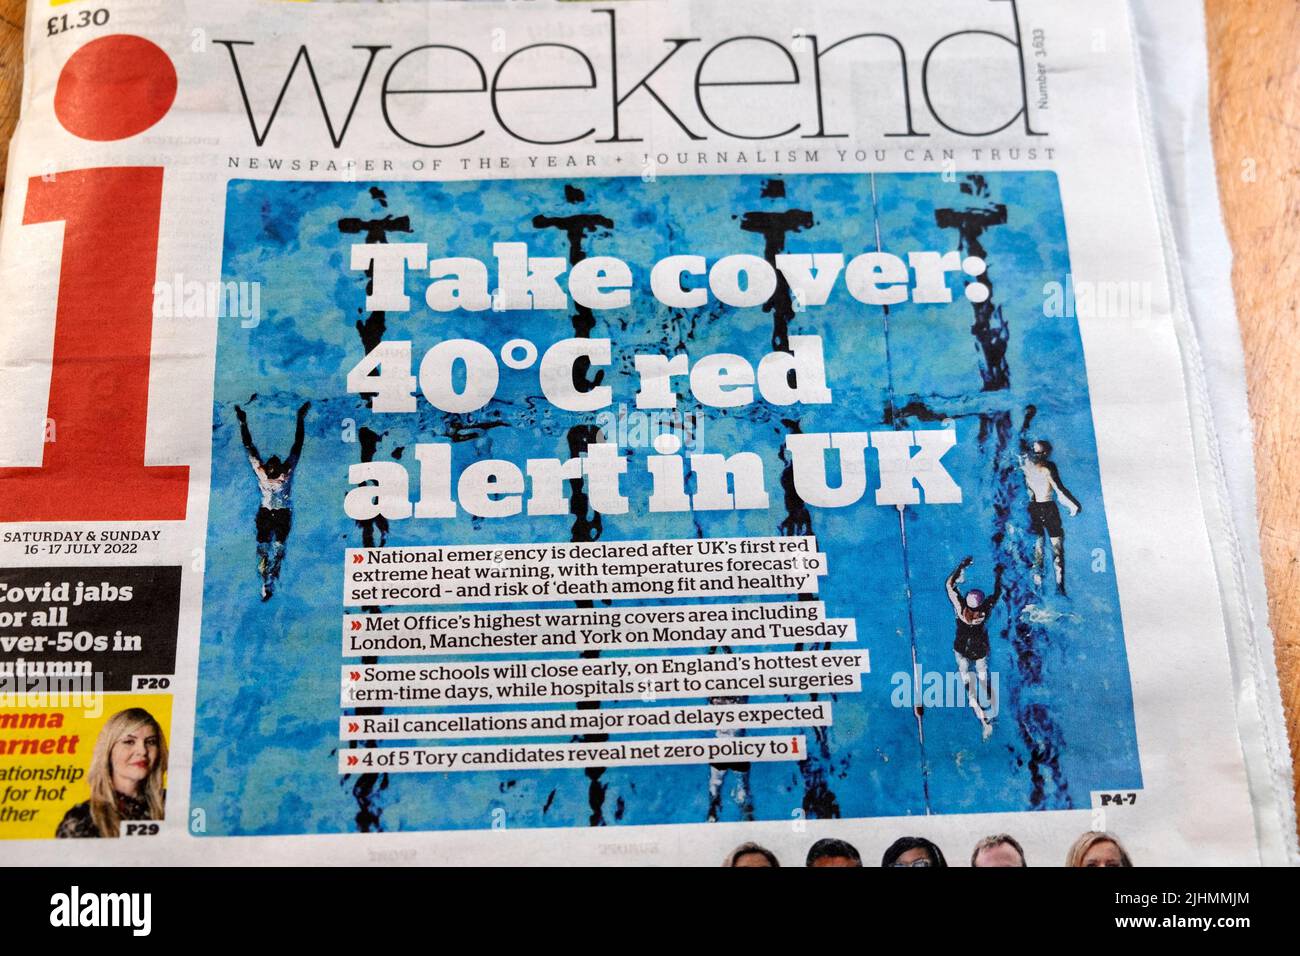 Heatwave warning front page i Weekend newspaper headline 'Take cover: 40°C red alert in UK' on 17 July 2022 London England UK Great Britain Stock Photo